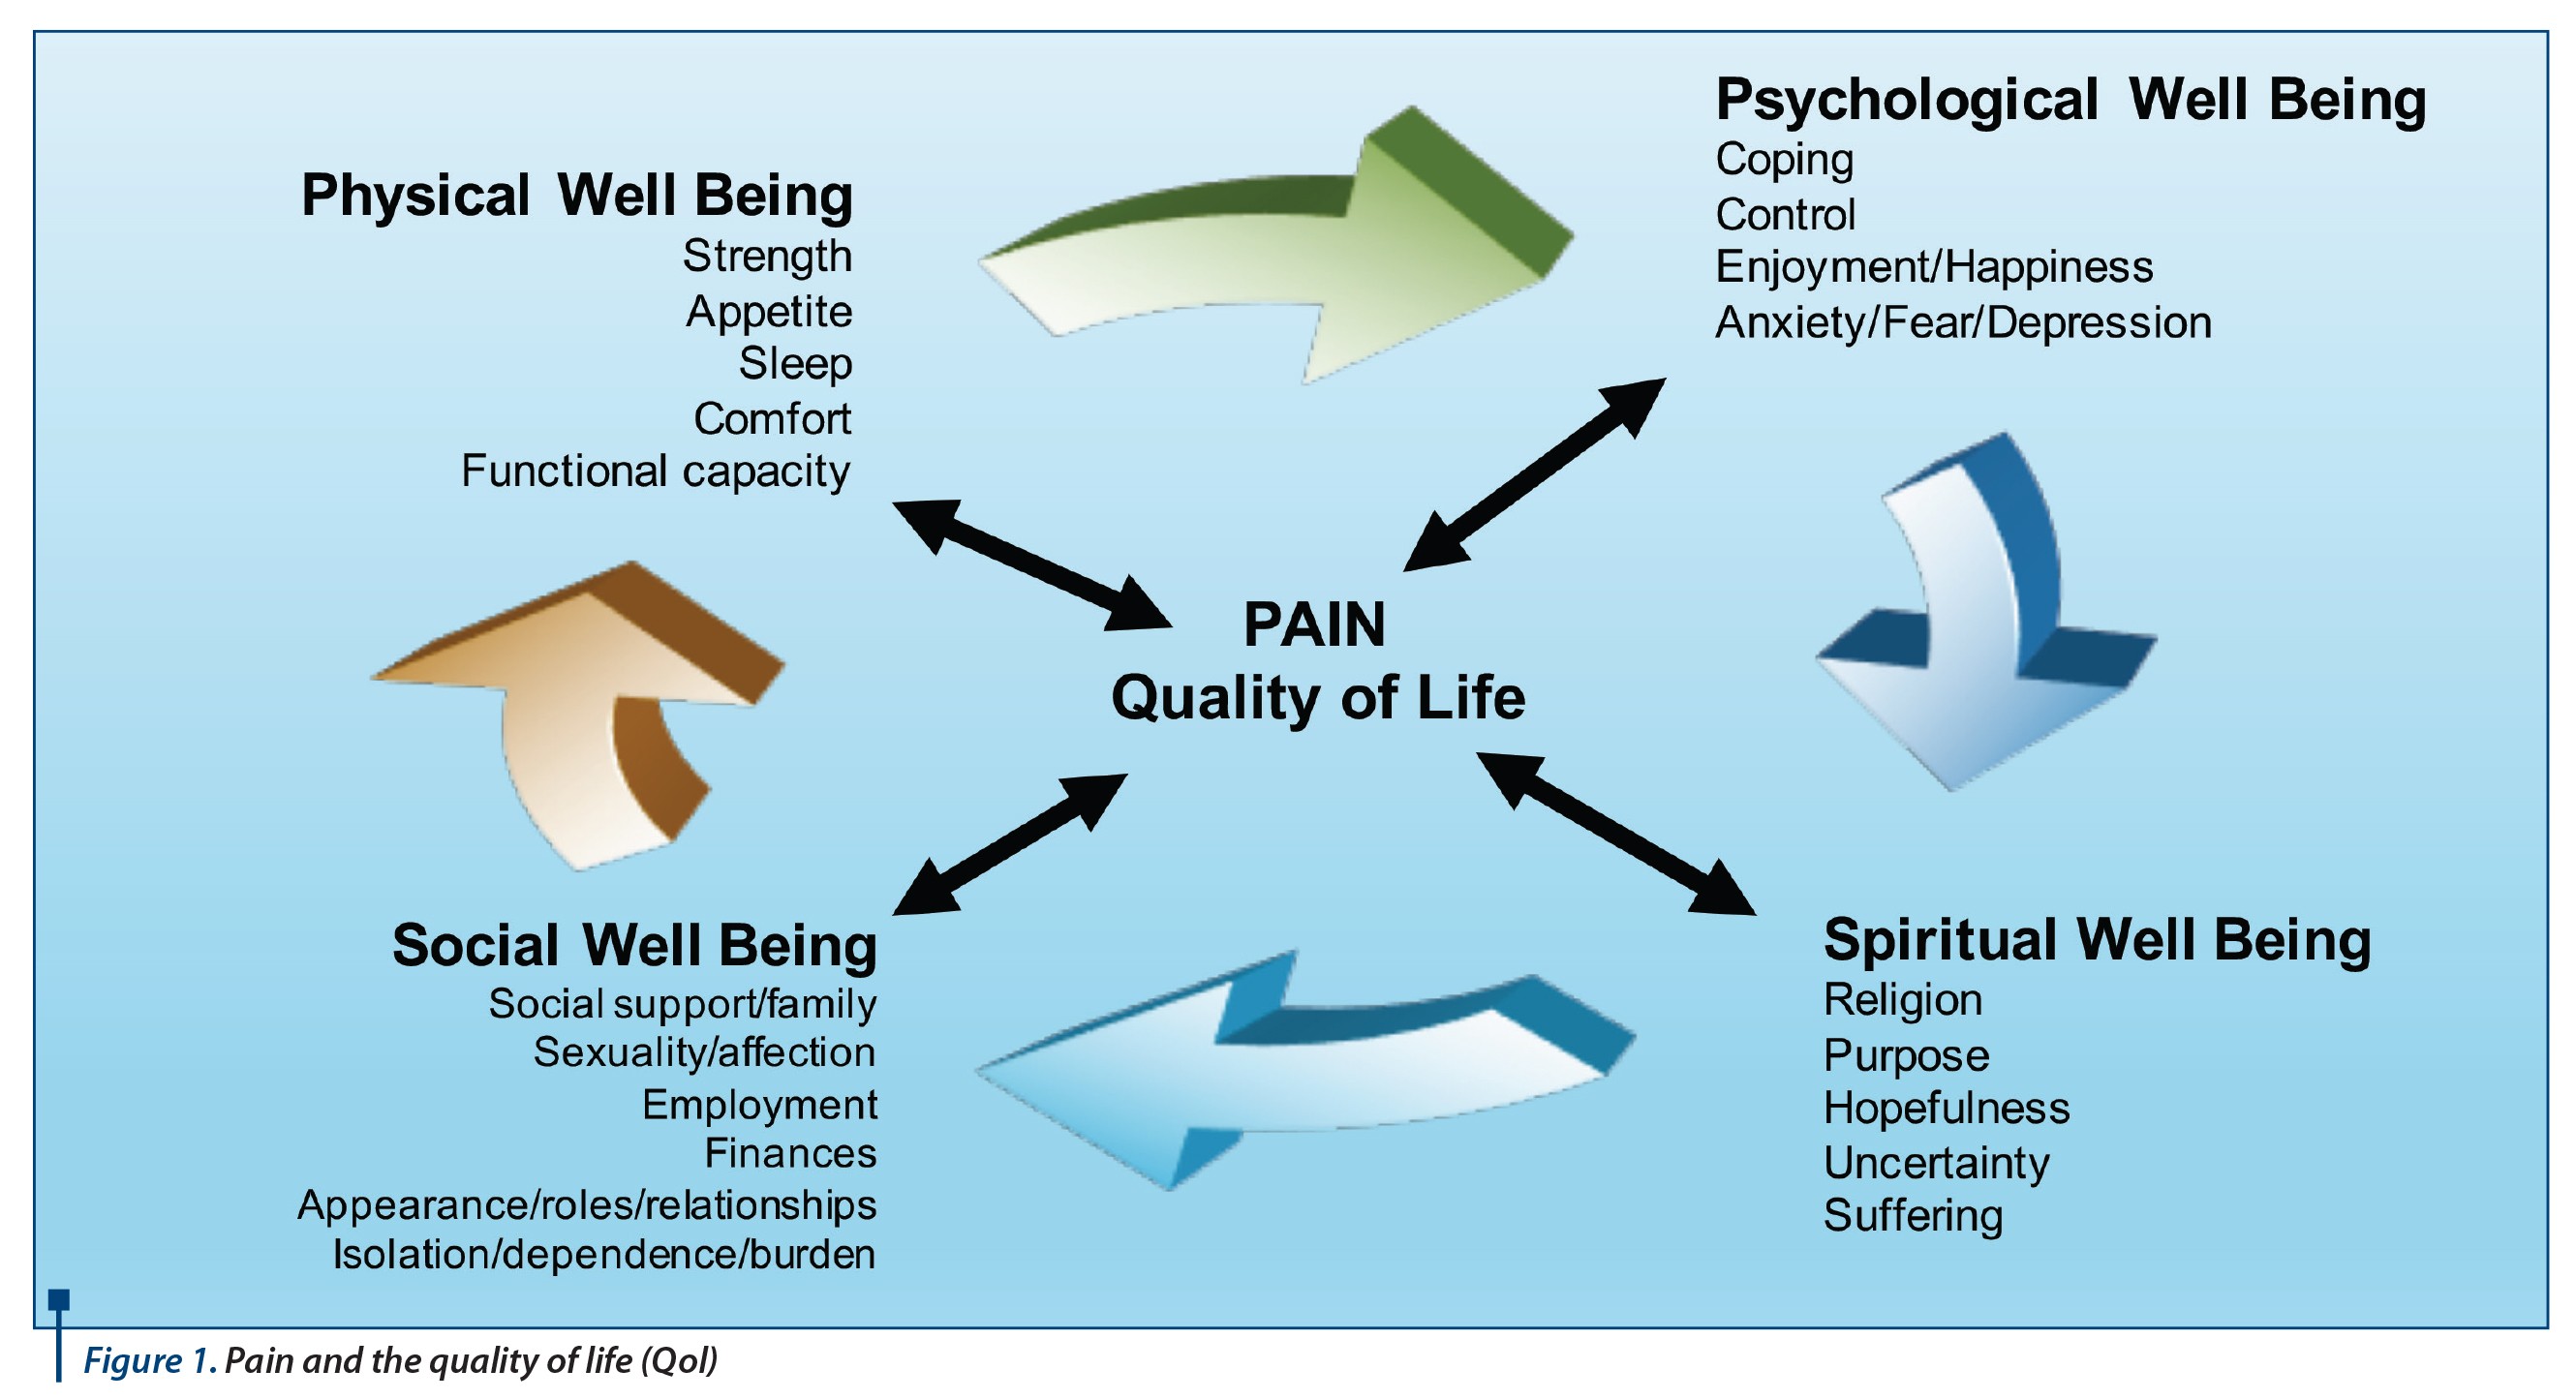 Figure 1. Pain and the quality of life (Qol)